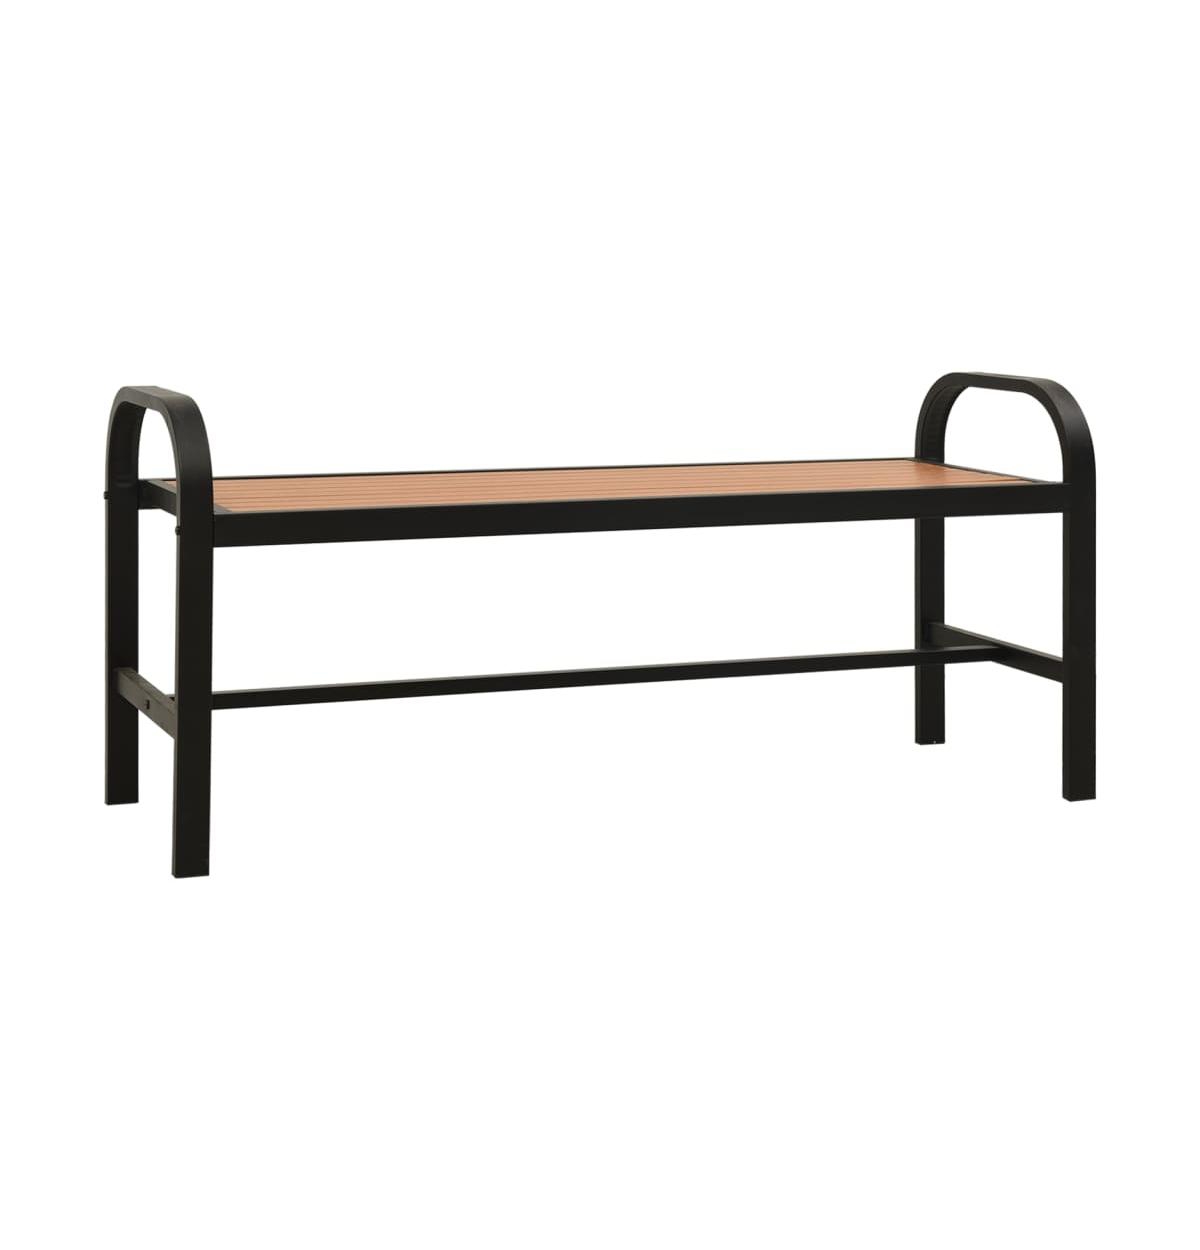 Vidaxl Patio Bench 49" Steel And Wpc Brown And Black